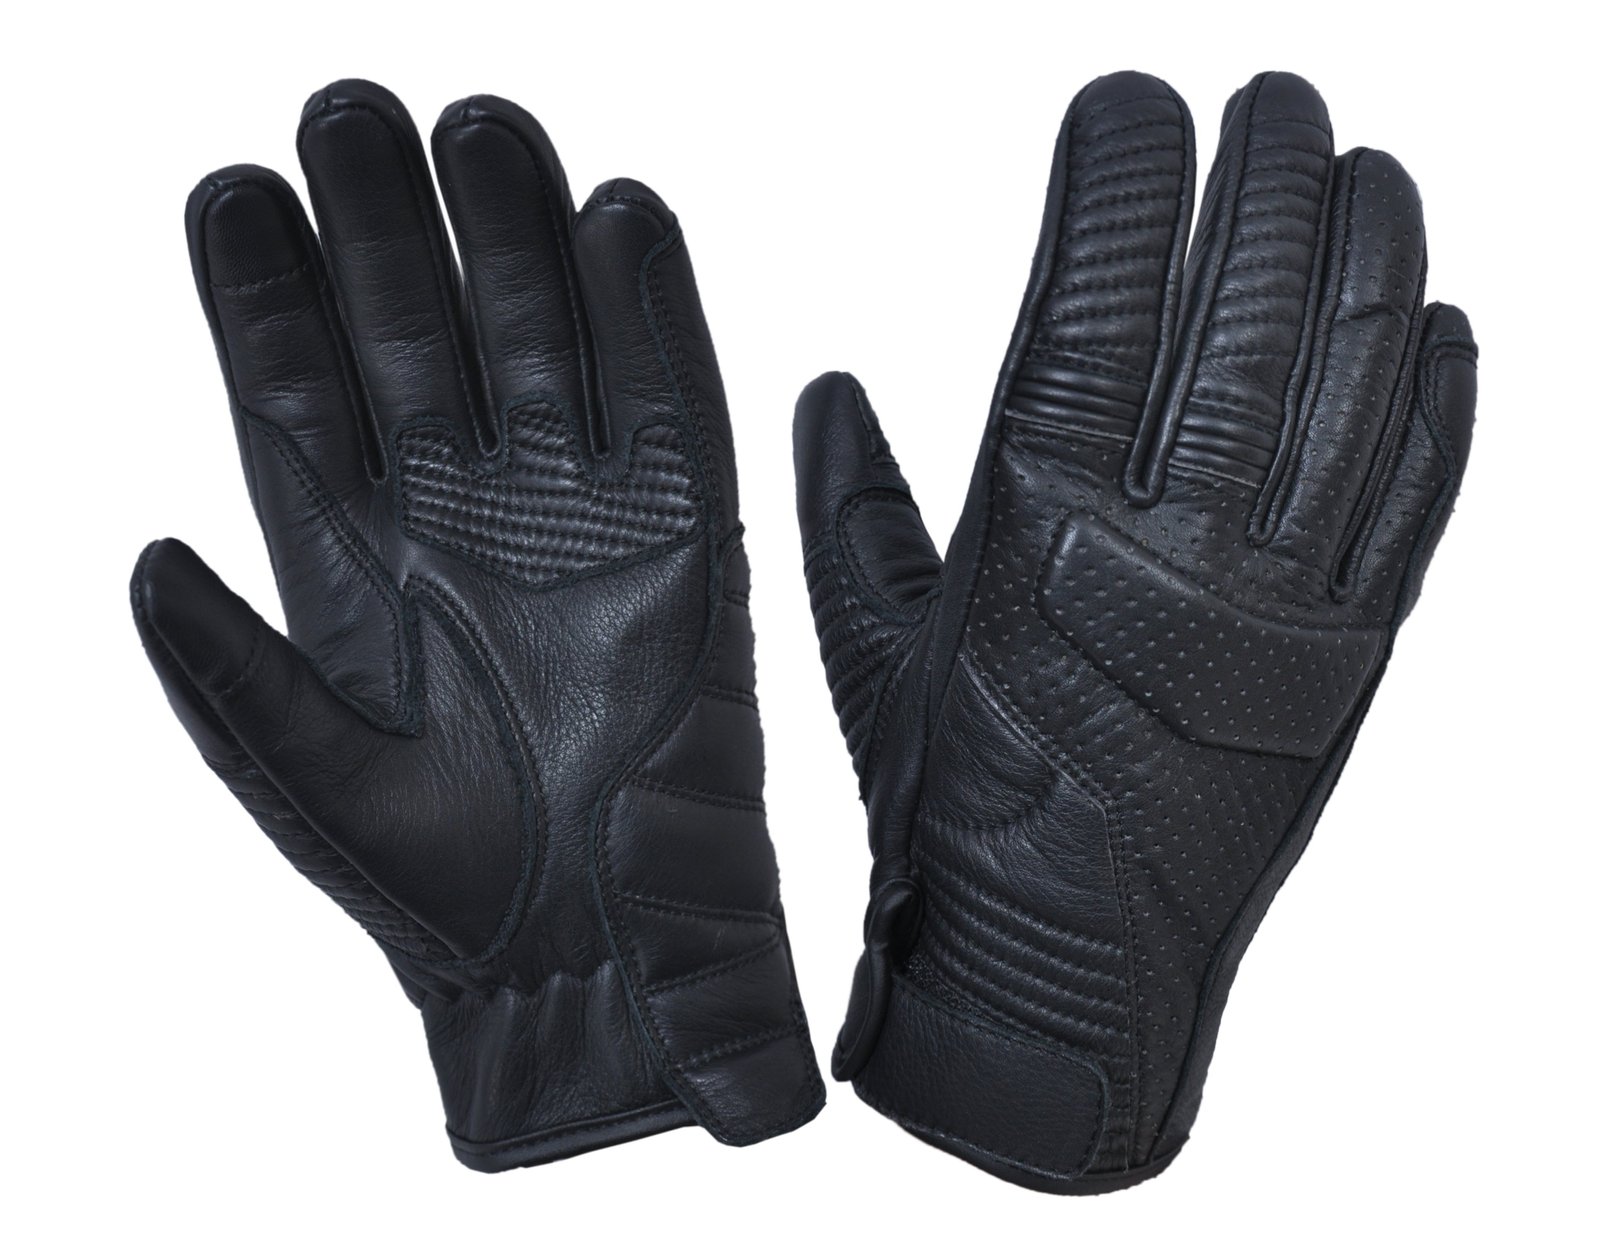 Leather Gloves - Full Finger - Perforated - Motorcycle - 8161-00-UN